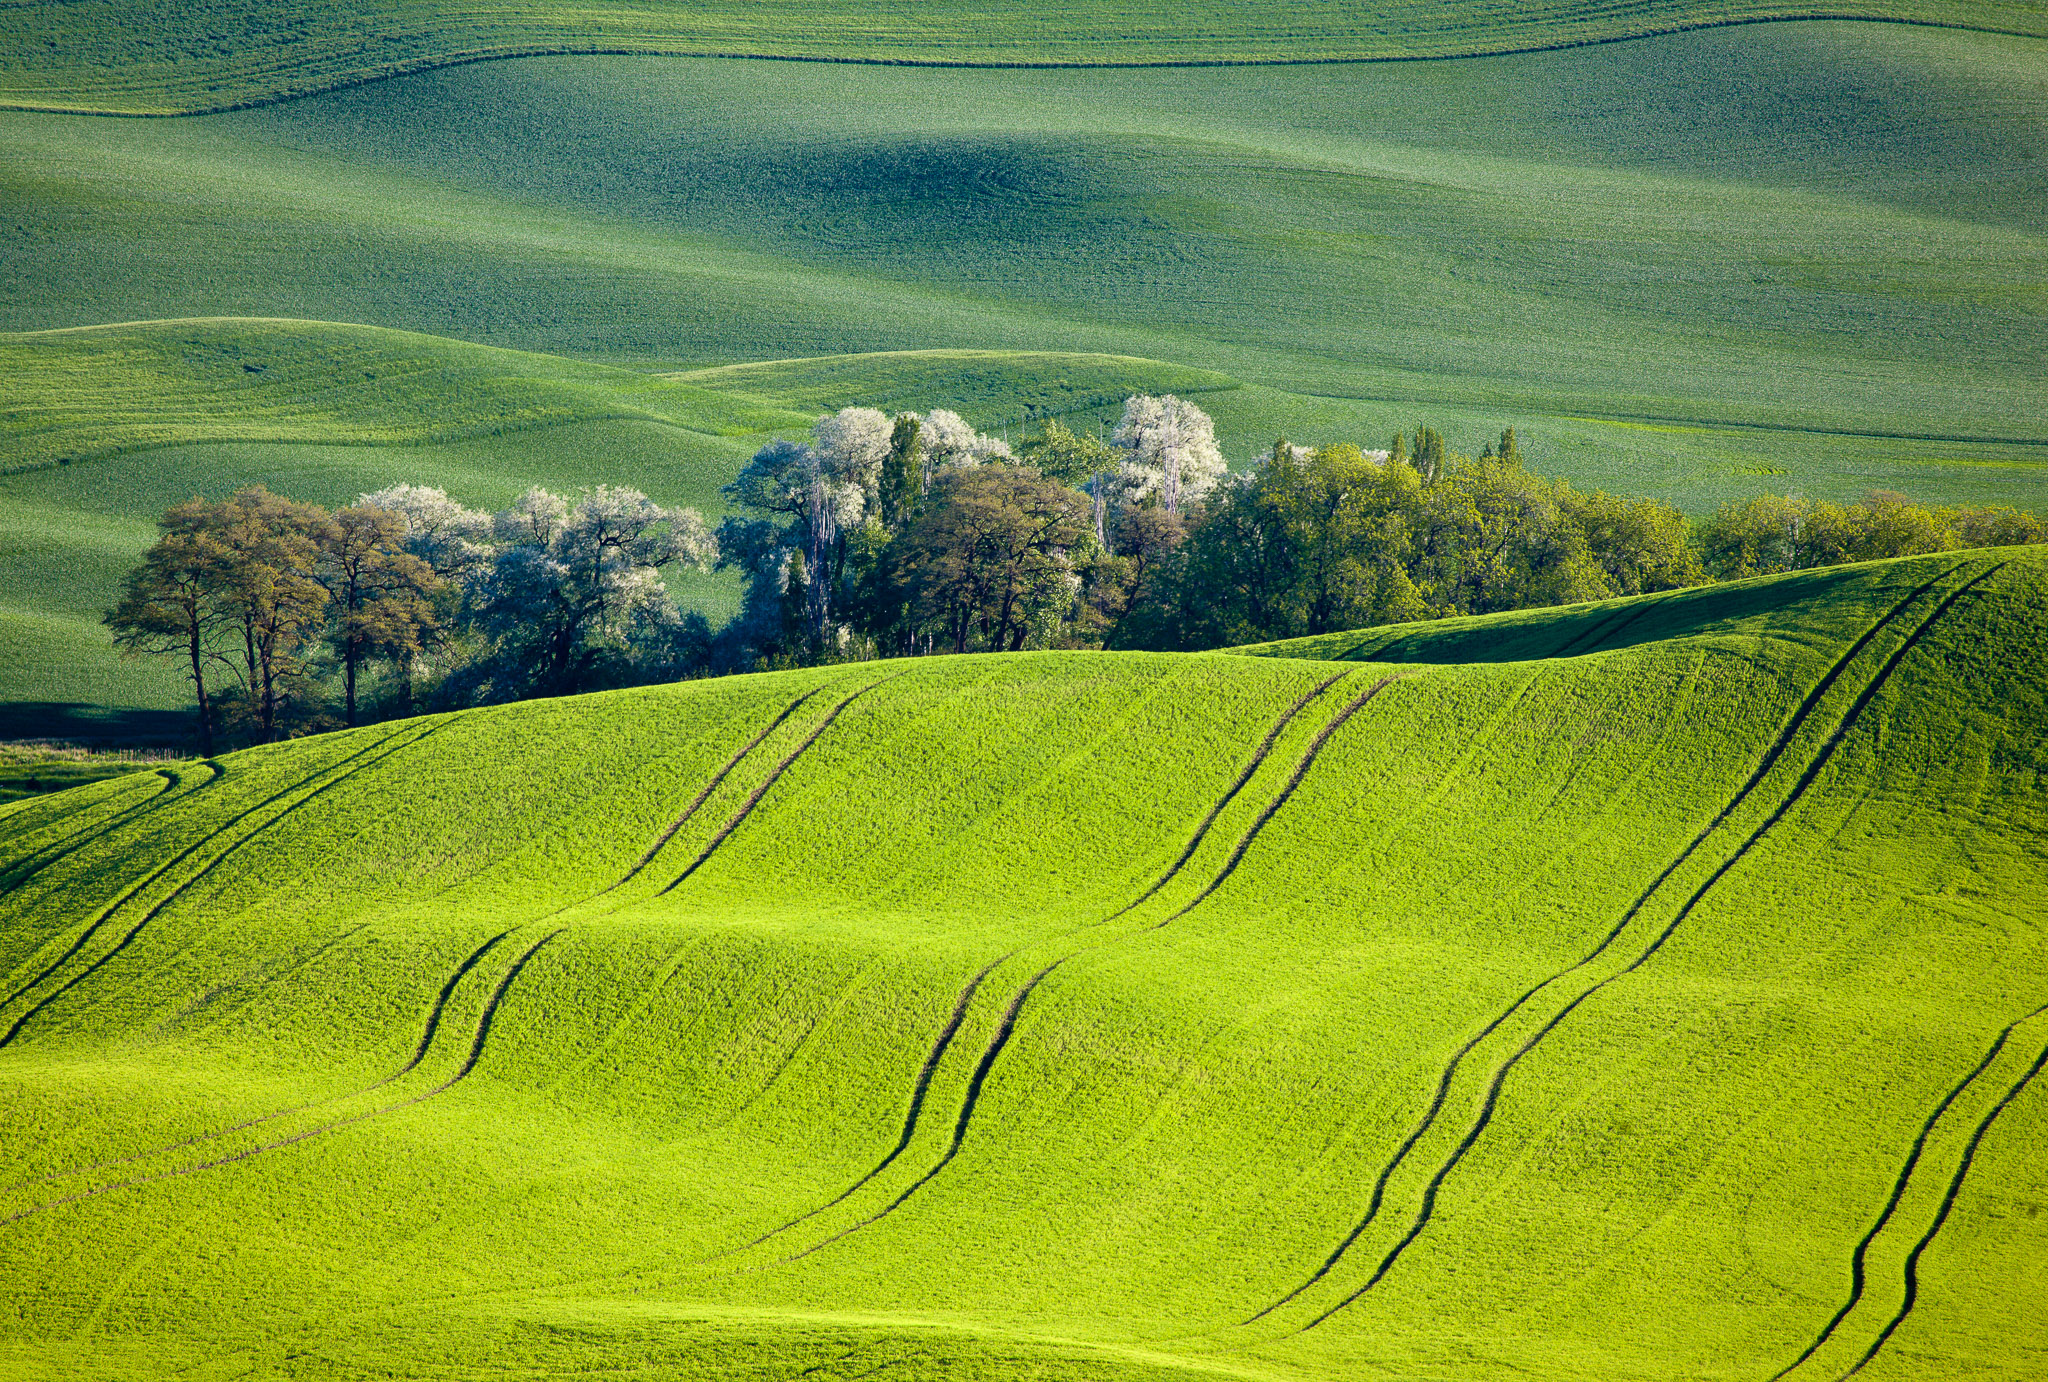 Late light from Steptoe Butte, The Palouse